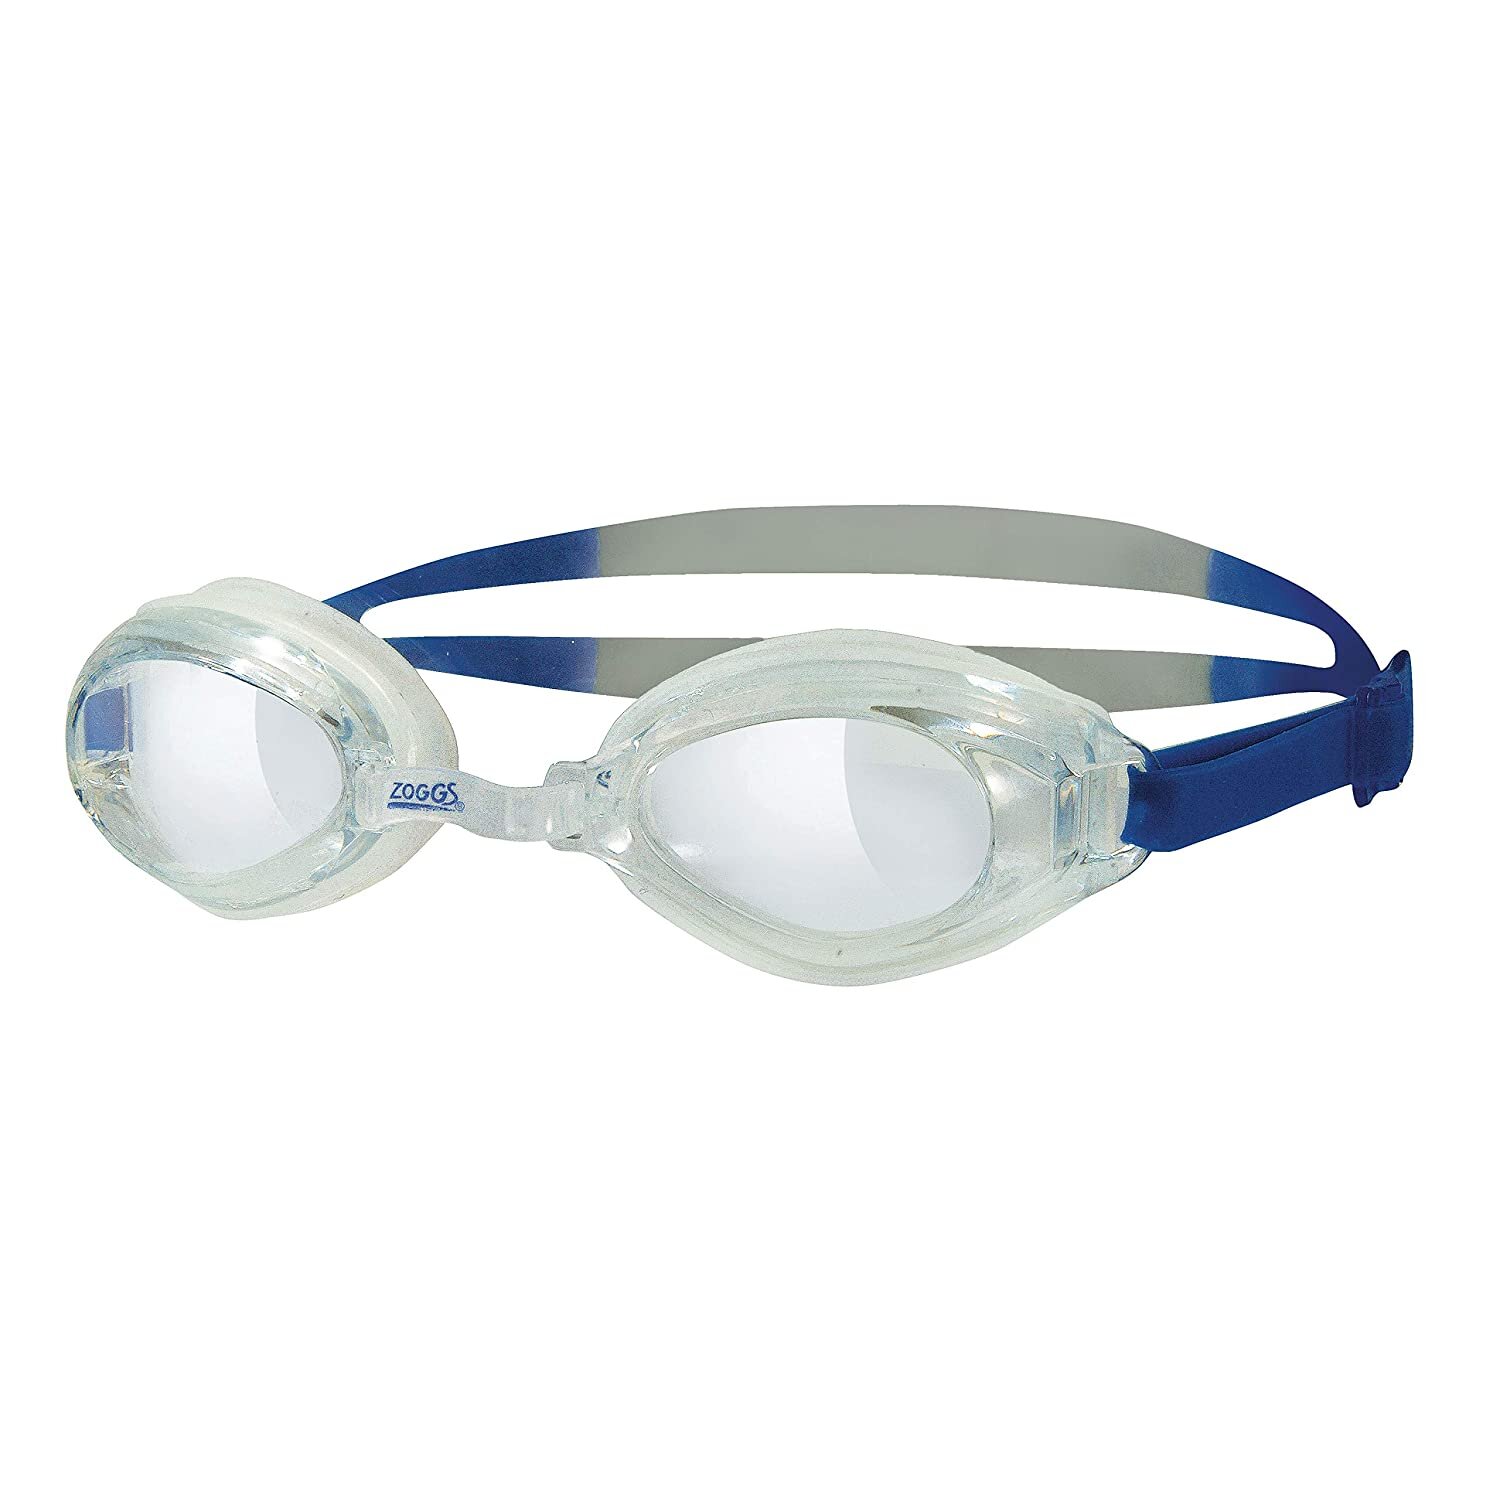 Zoggs Swimming Goggles Endura w/ Anti-Fog Lenses in Clear/Blue/Silver - One Size